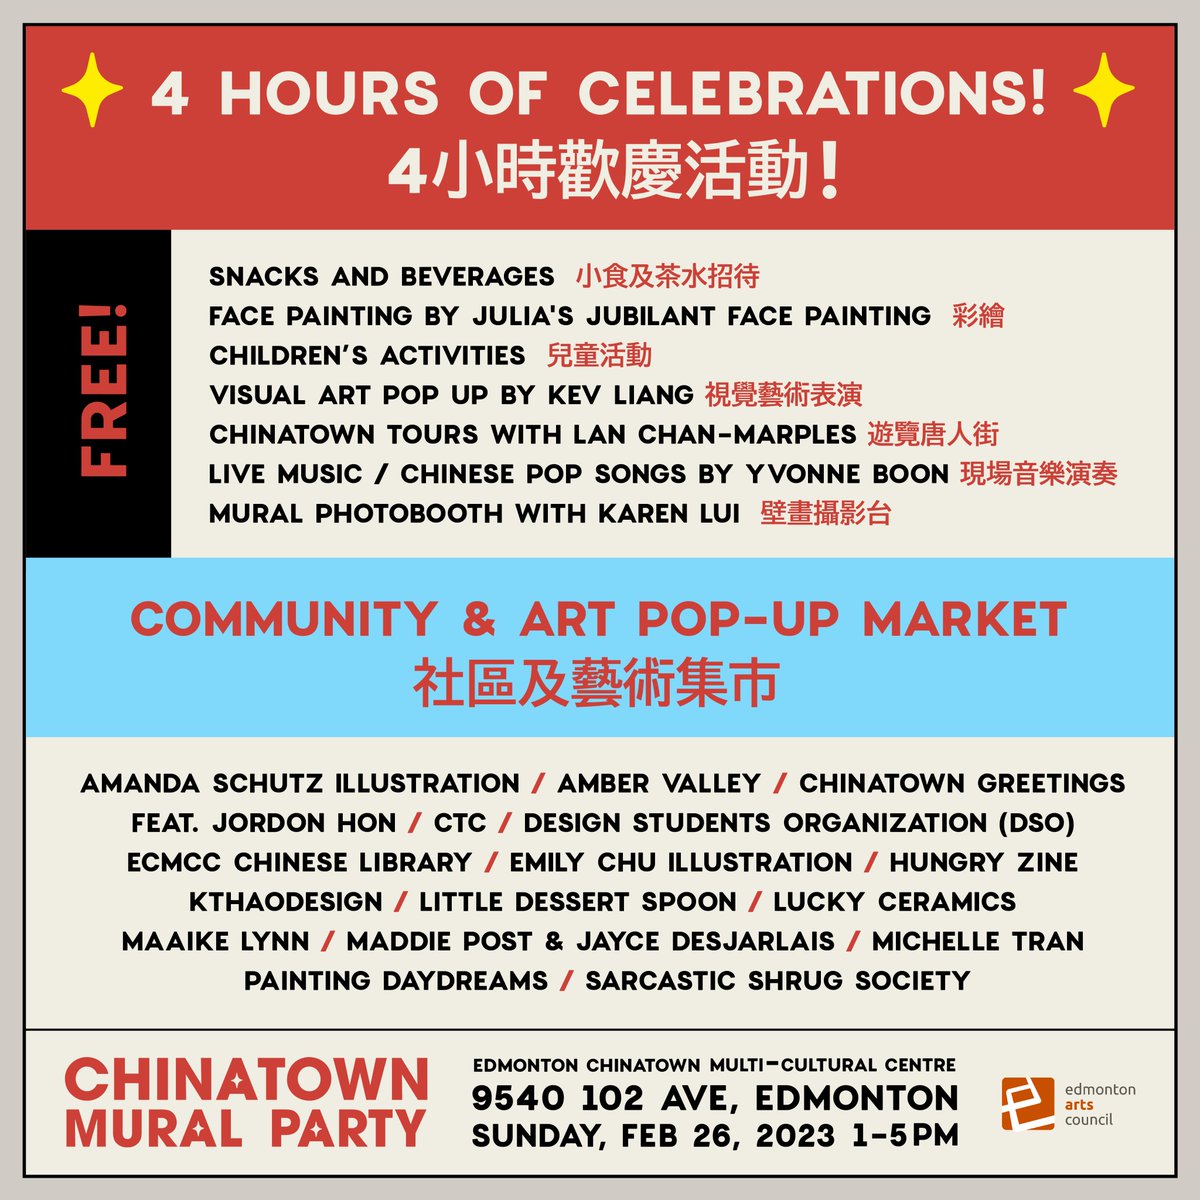 SUNDAY FUNDAY! It's 'Community/Arts Day' in Chinatown - Feb 26, 1-5pm! So thrilled to share this space with so many community orgs, artists, musicians, and more! Big thanks to @artsedmonton for the support ❤️ Hope to see you! #mural #yegmural #chinatownyeg #yegarts